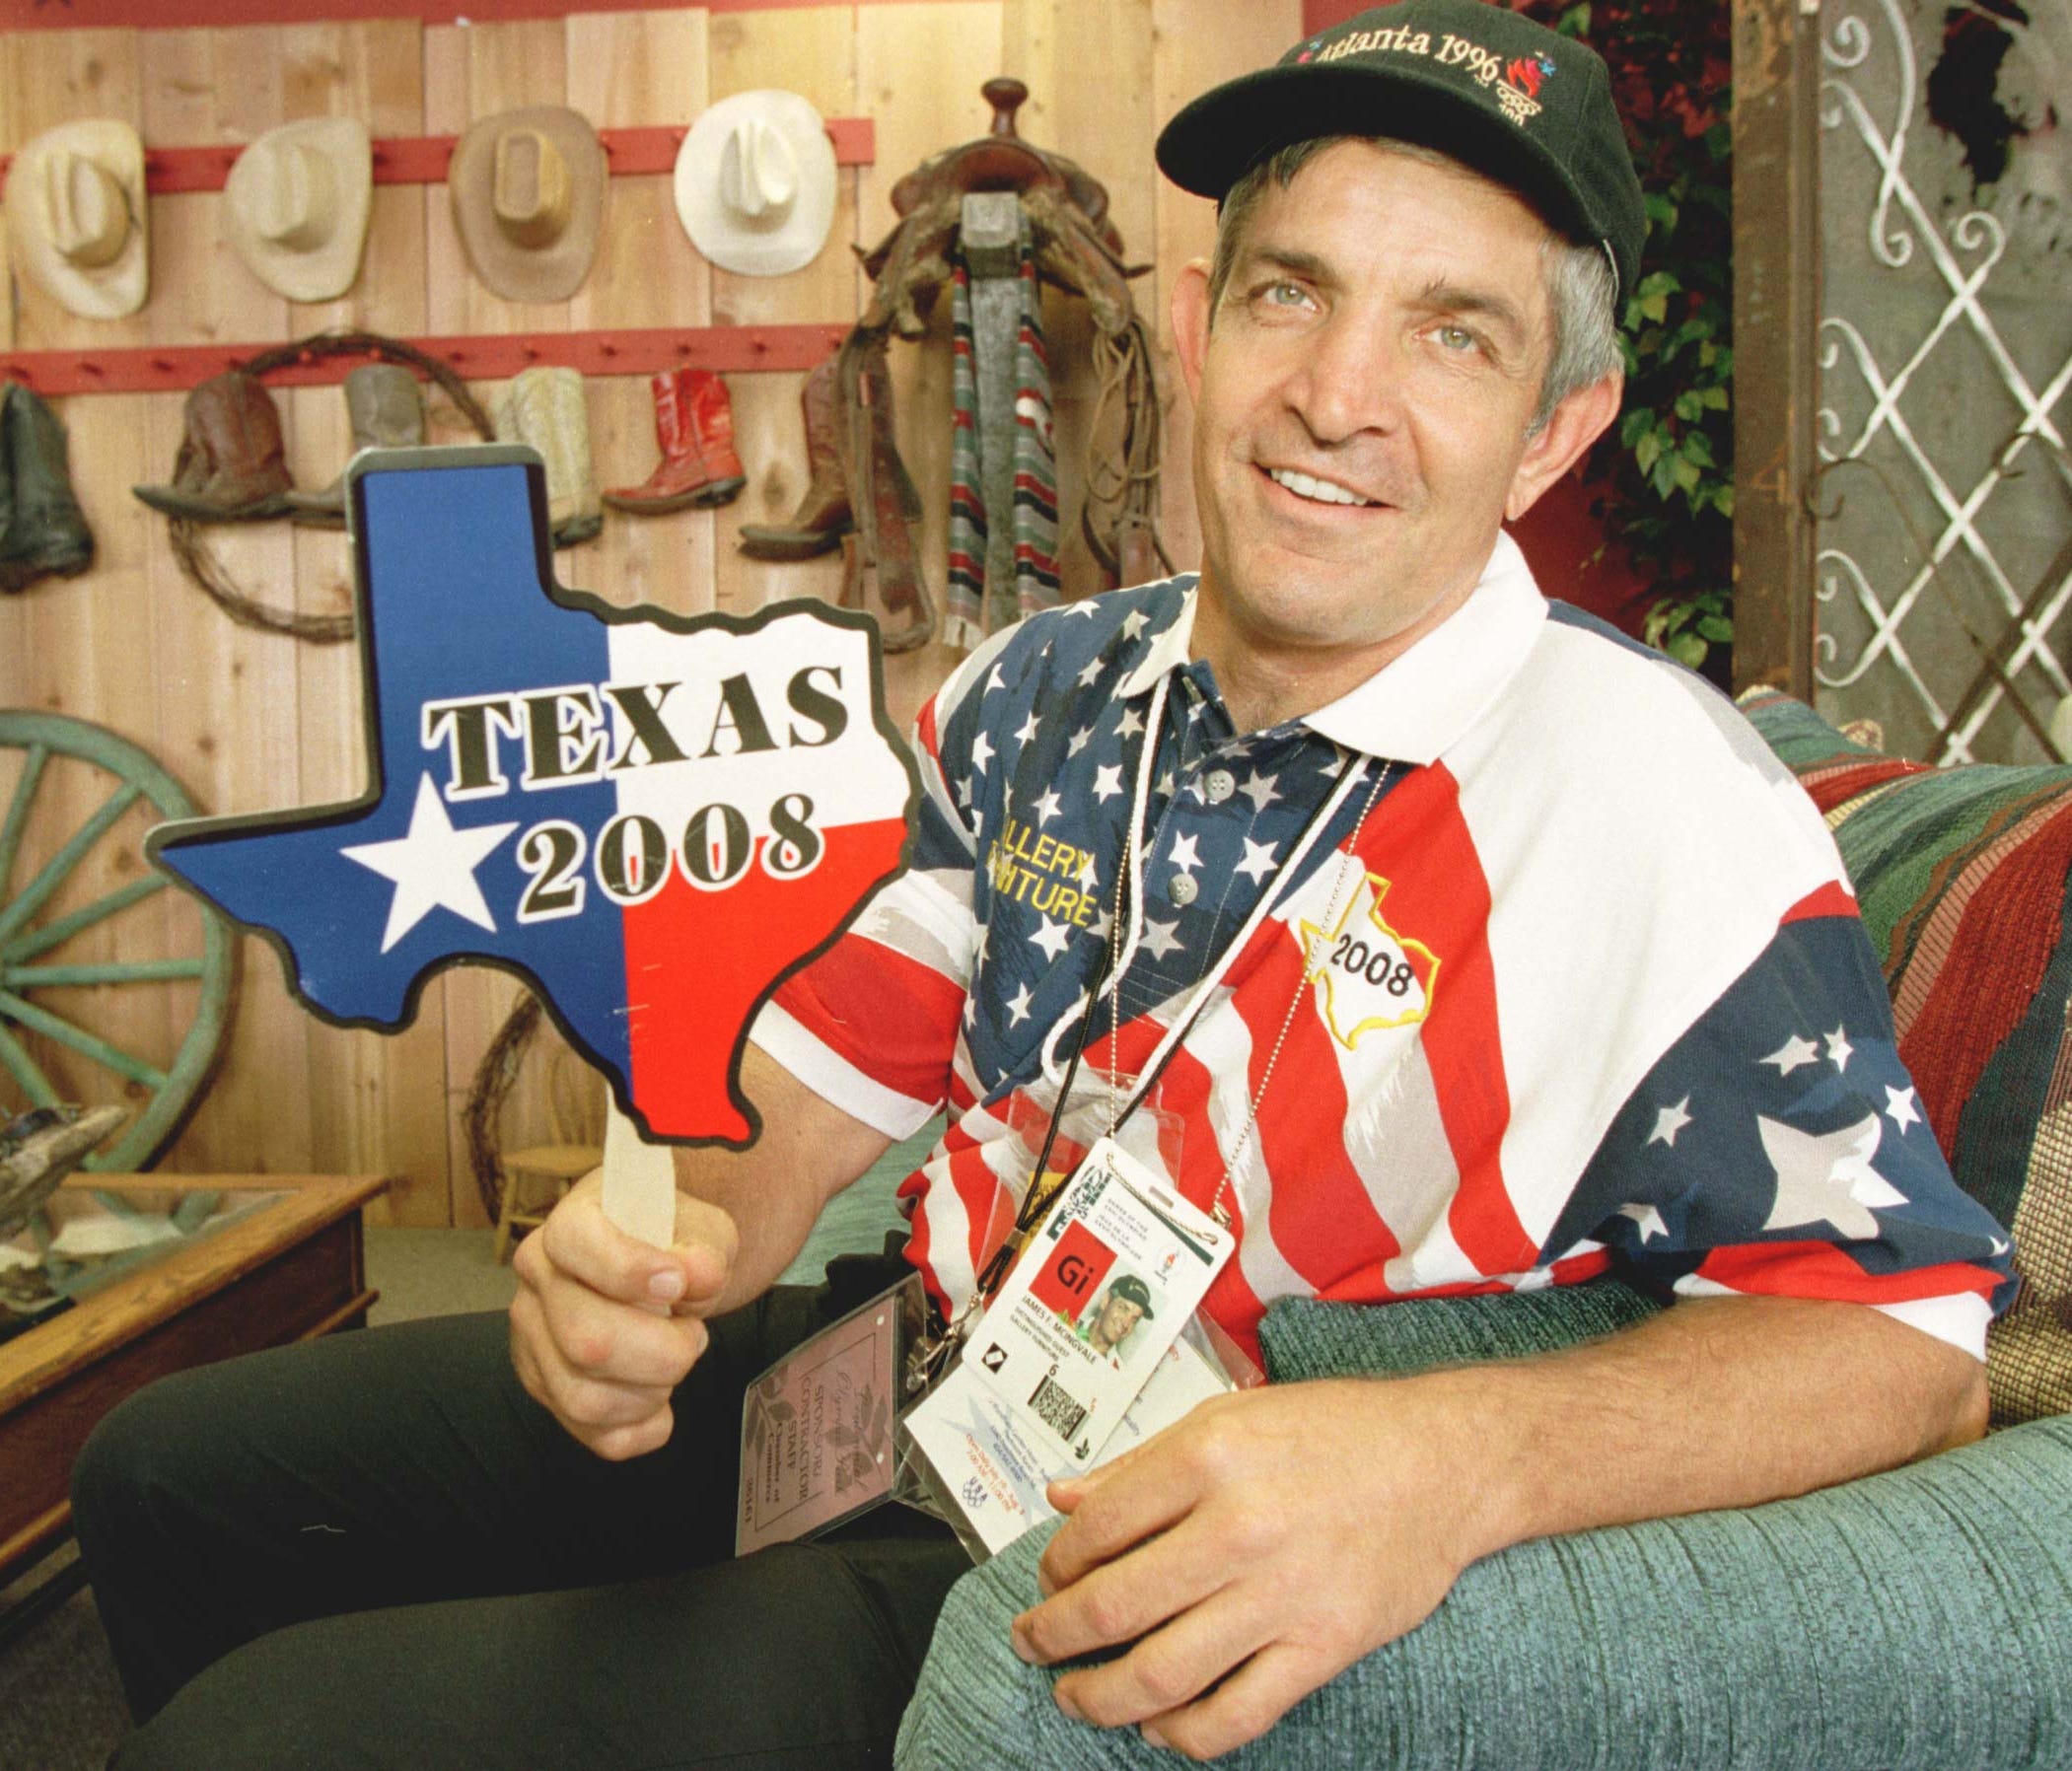 As far back as 1996, when this picture was taken during the Summer Olympic Games in Atlanta, owner Jim McIngvale of Gallery Furniture in Houston has been a booster, in this case pushing for Texas as an Olympic venue in 2008.